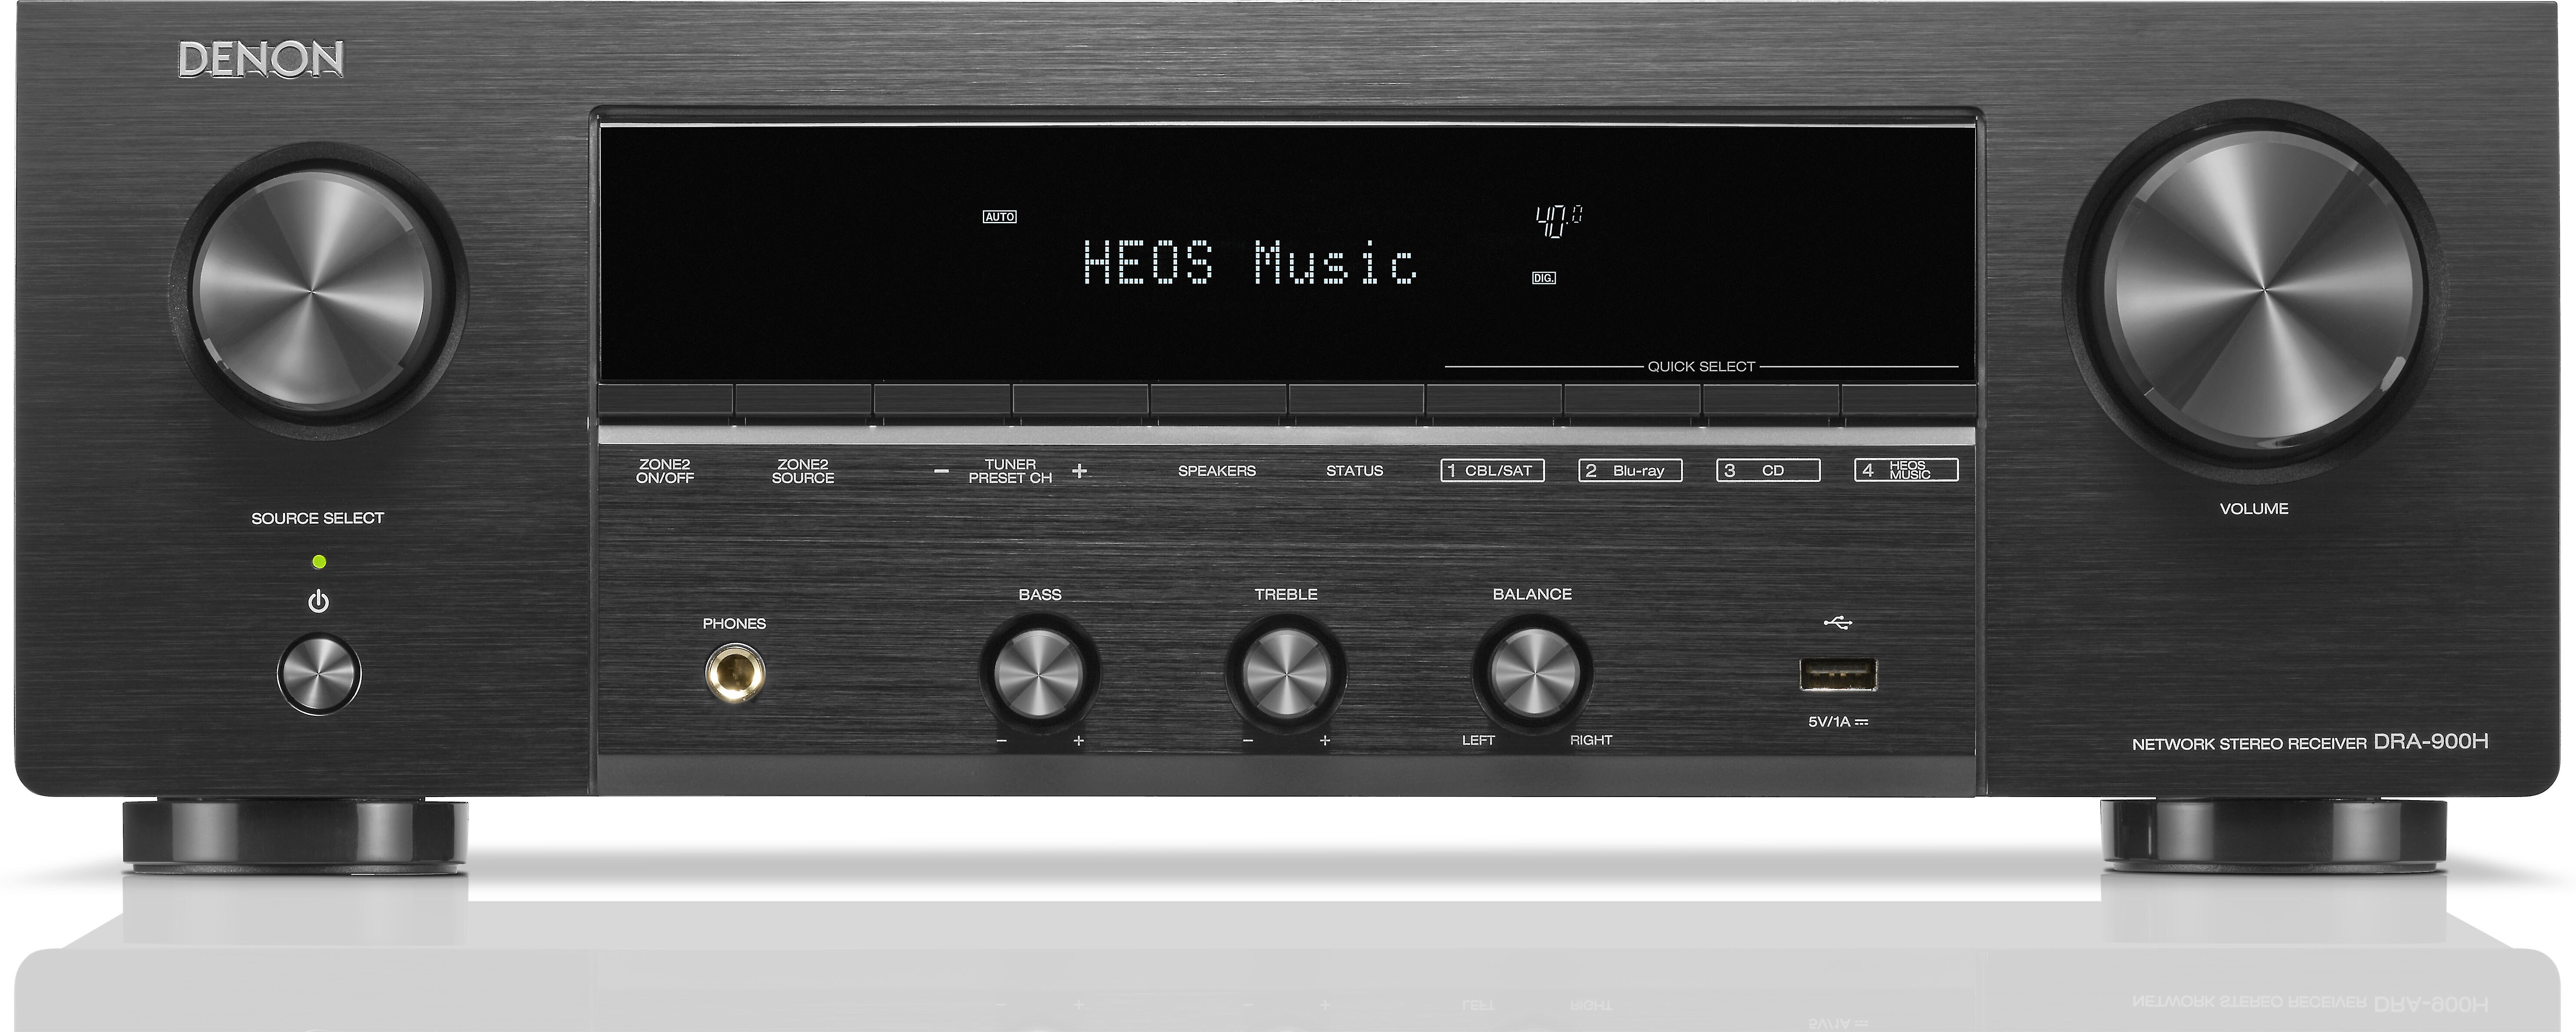 DRA-900H with receiver built-in Product 2, Wi-Fi®, Bluetooth®, and Built-in AirPlay® Crutchfield Apple at Stereo HEOS HDMI, Videos: Denon